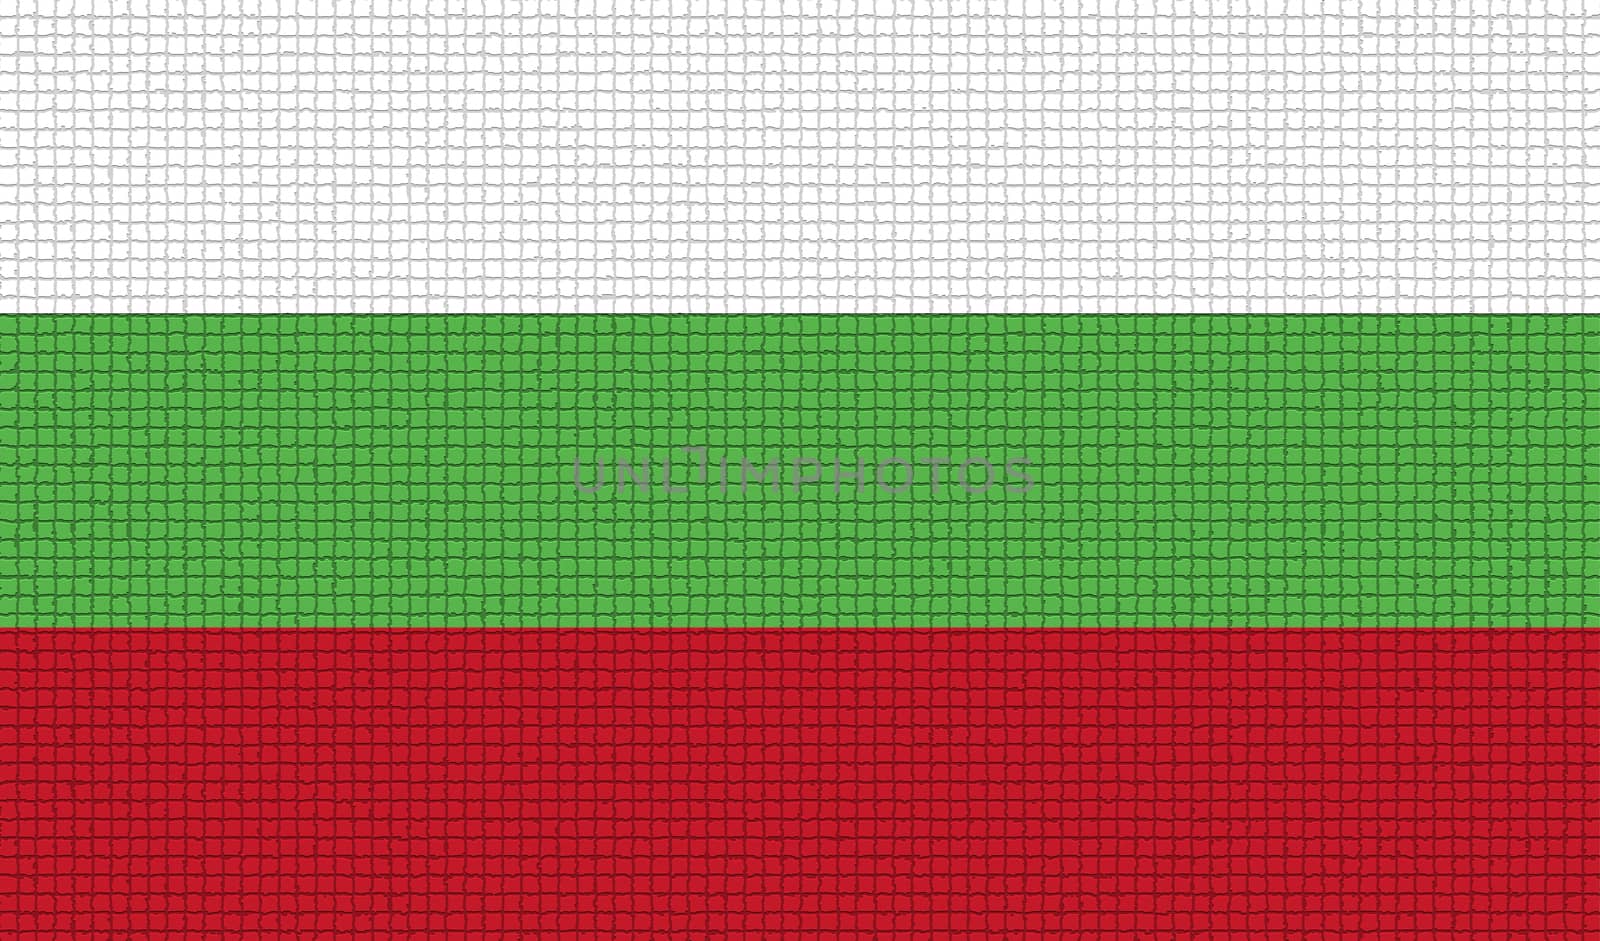 Flags of Bulgaria with abstract textures. Rasterized version